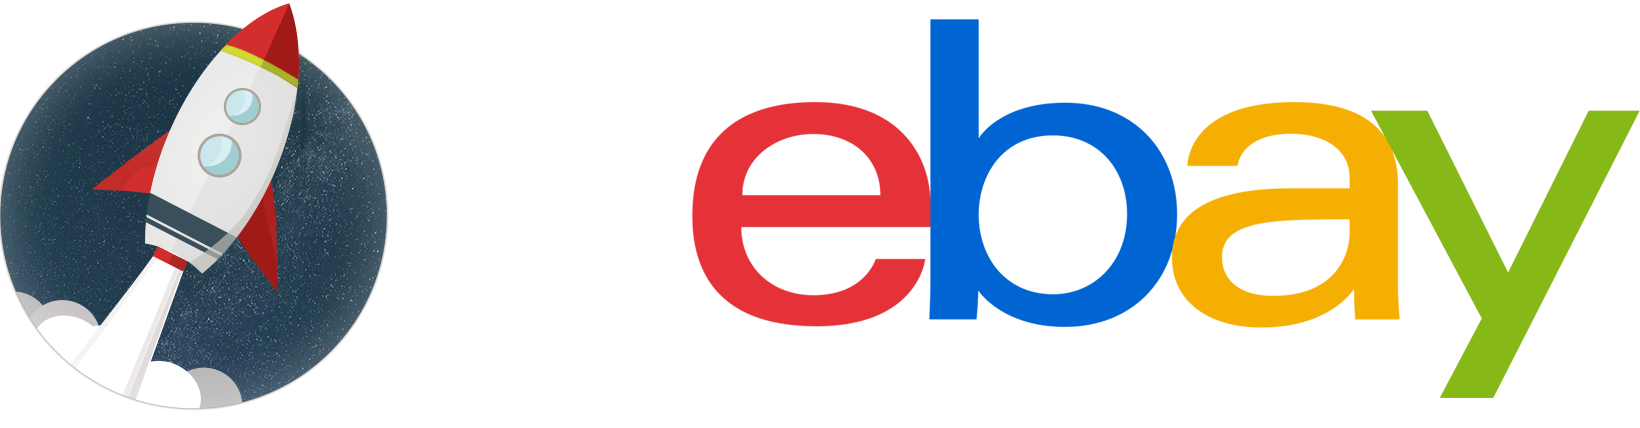 eBay PNG Isolated Image